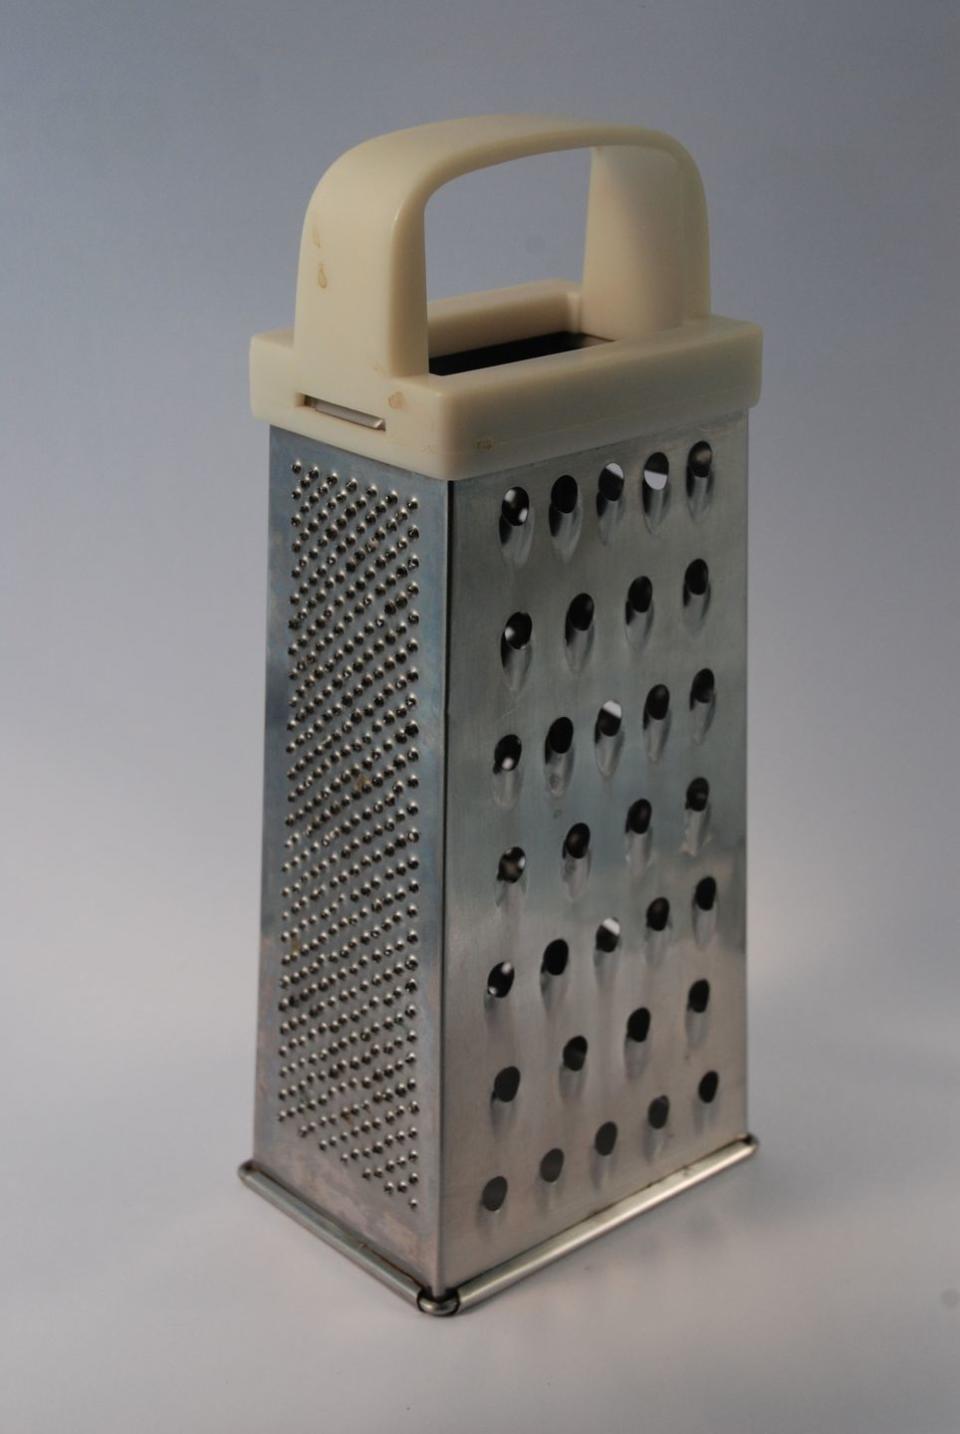 Before: Cheese Grater